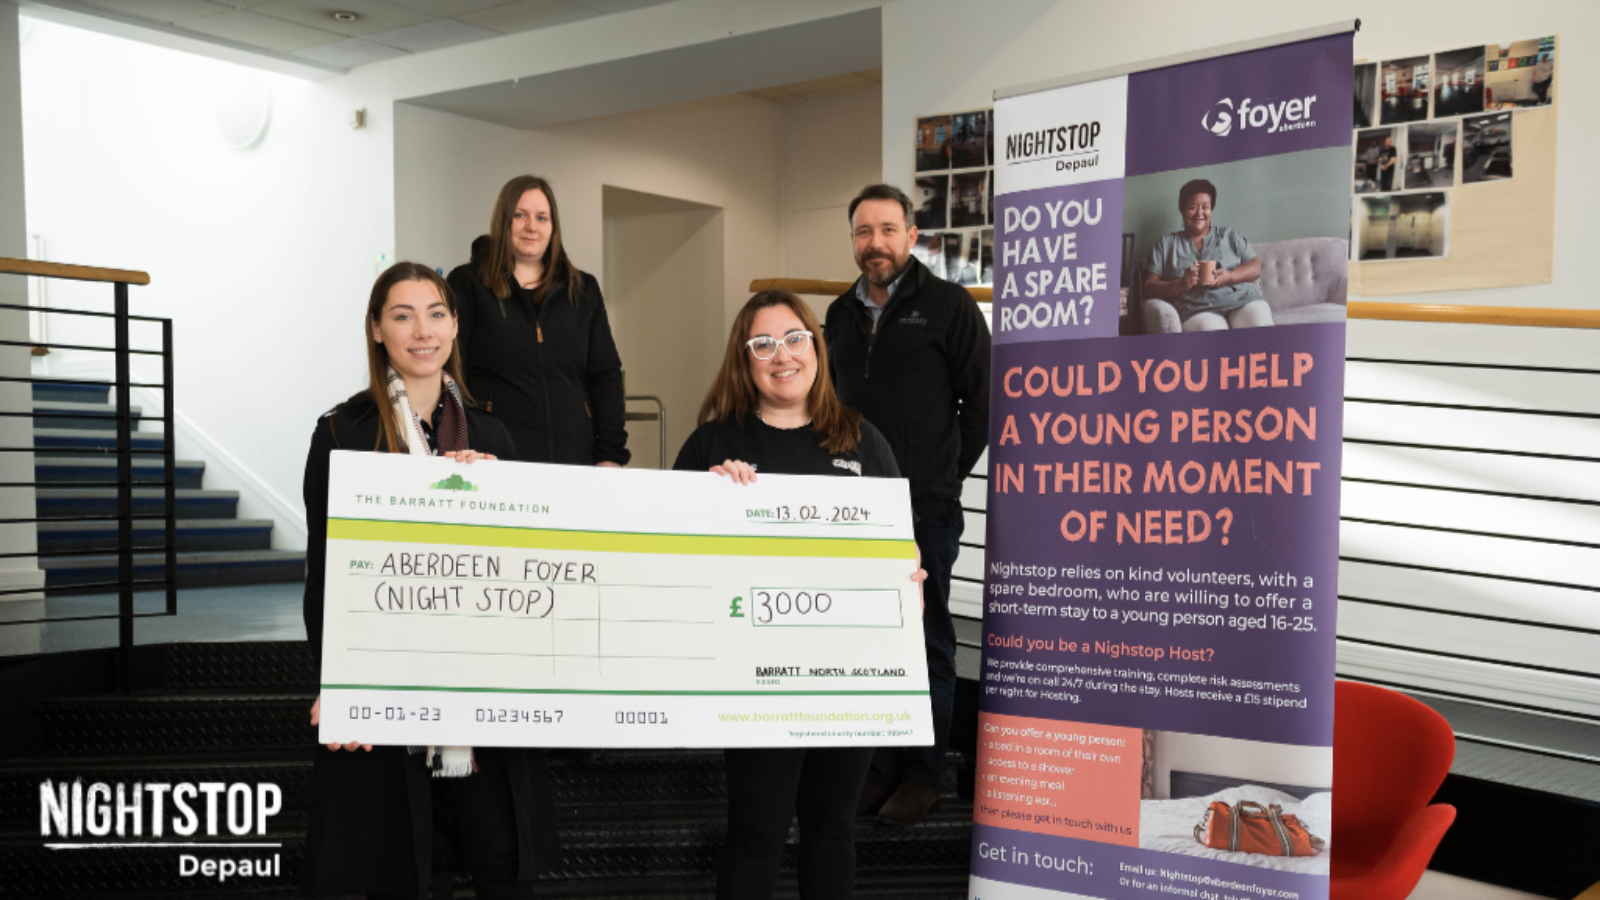 Aberdeen Foyer thanks Barrat Homes for generous donation to Nightstop project